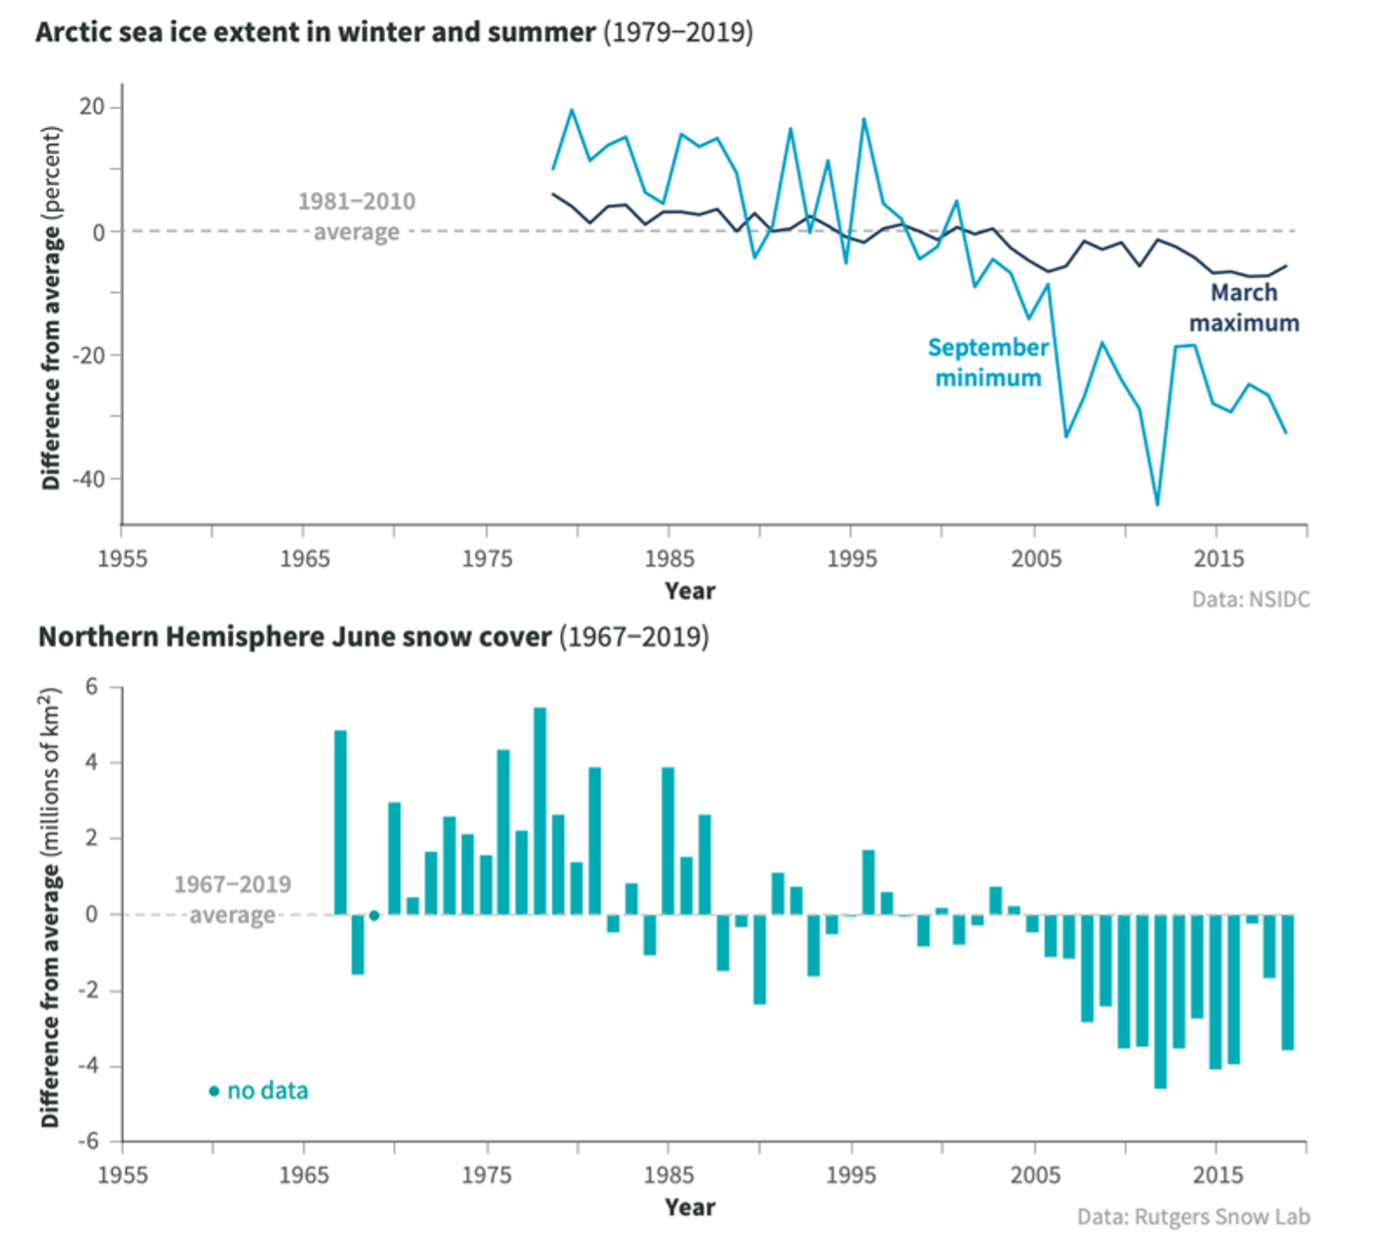 Two graphs: Arctic Sea Ice Extent in Winter and Summer (1979-2019), and Northern Hemisphere June Snow Cover (1967-2019)